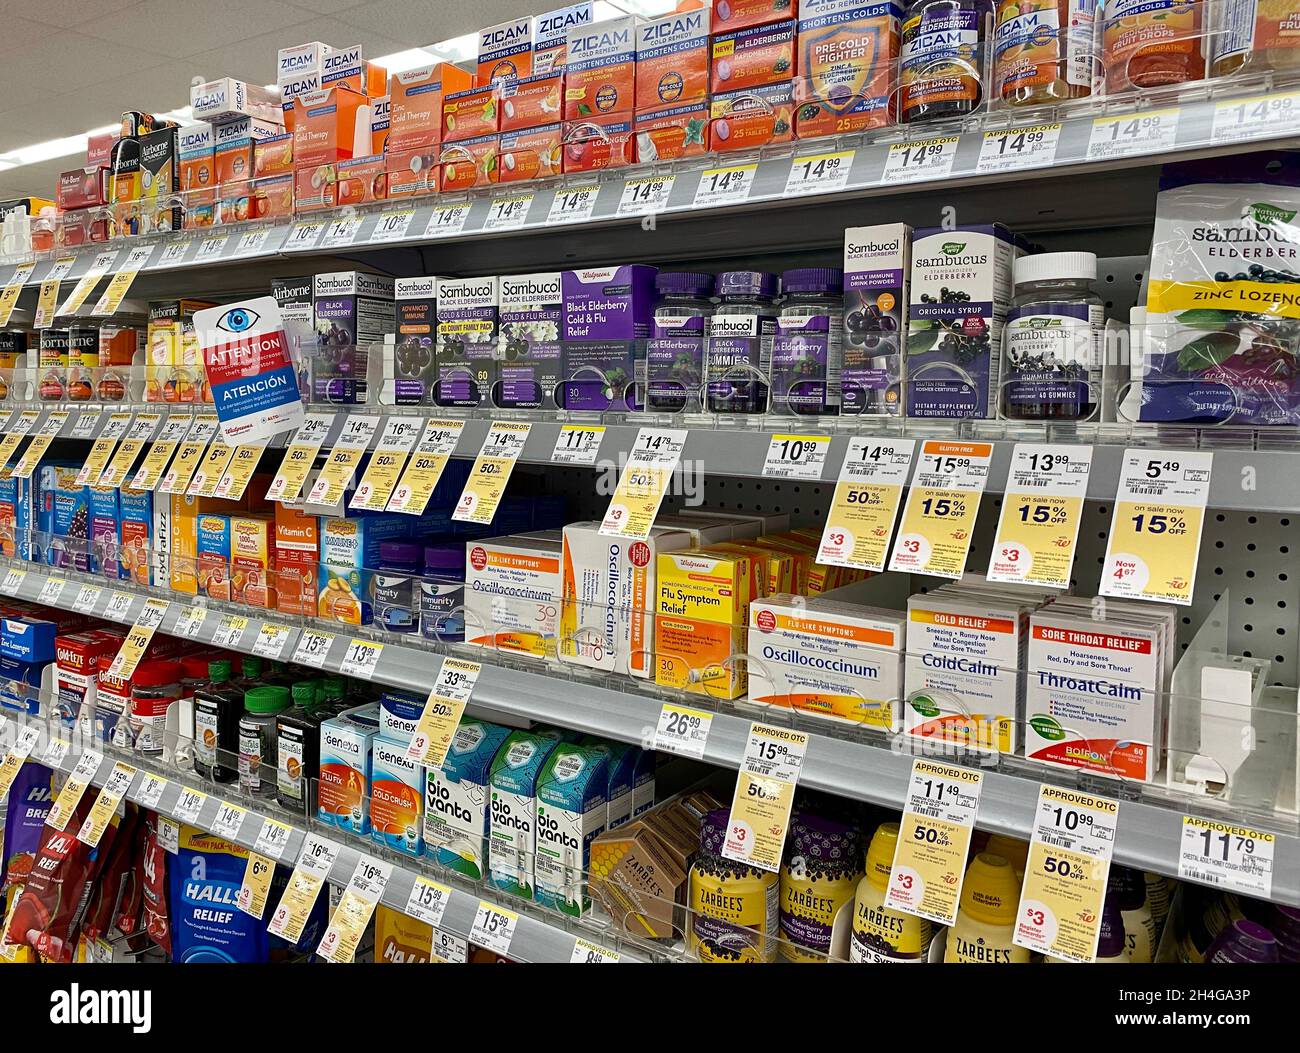 Cold, sinus and allergy medicine on the shelf at Walgreens drug store. Stock Photo